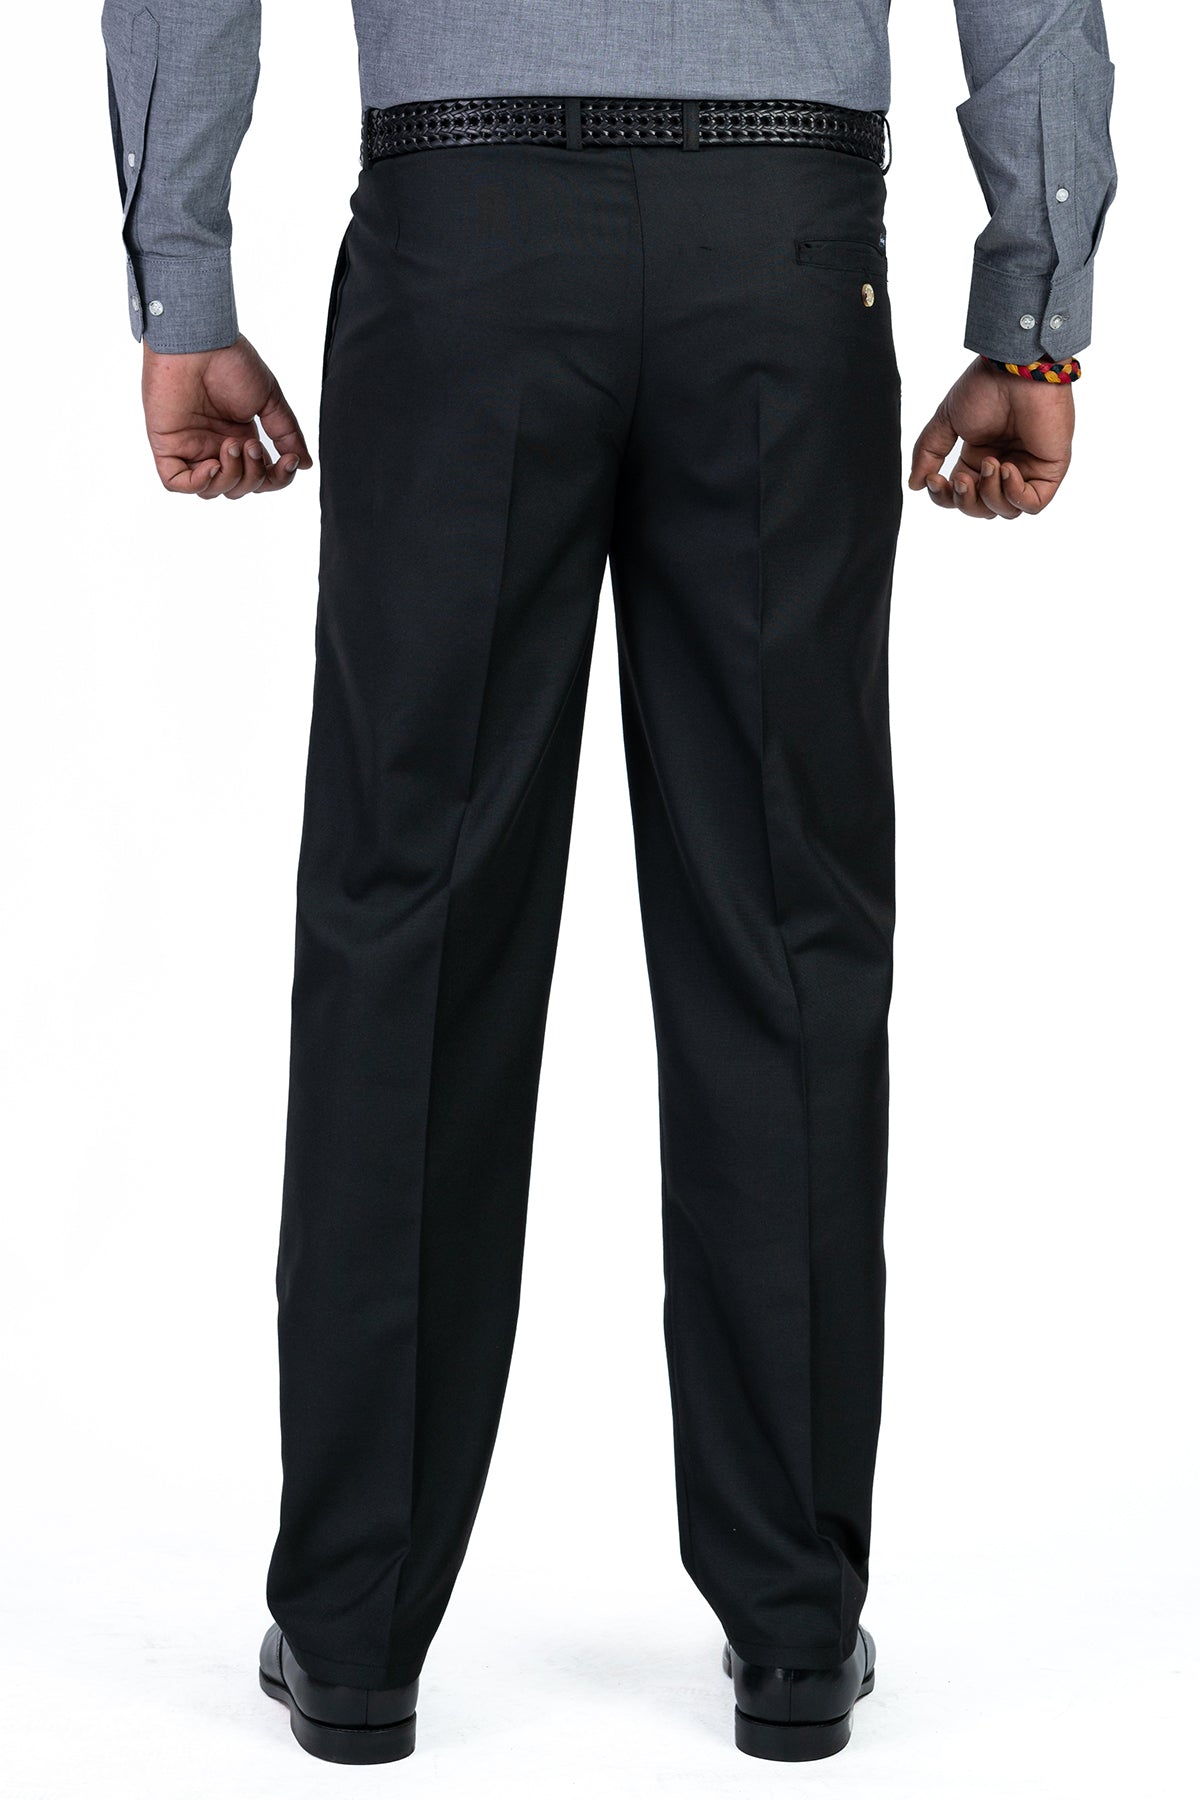 Wholesale Mens Formal Trousers Dress Pants  China Pants and Mans Pants  price  MadeinChinacom